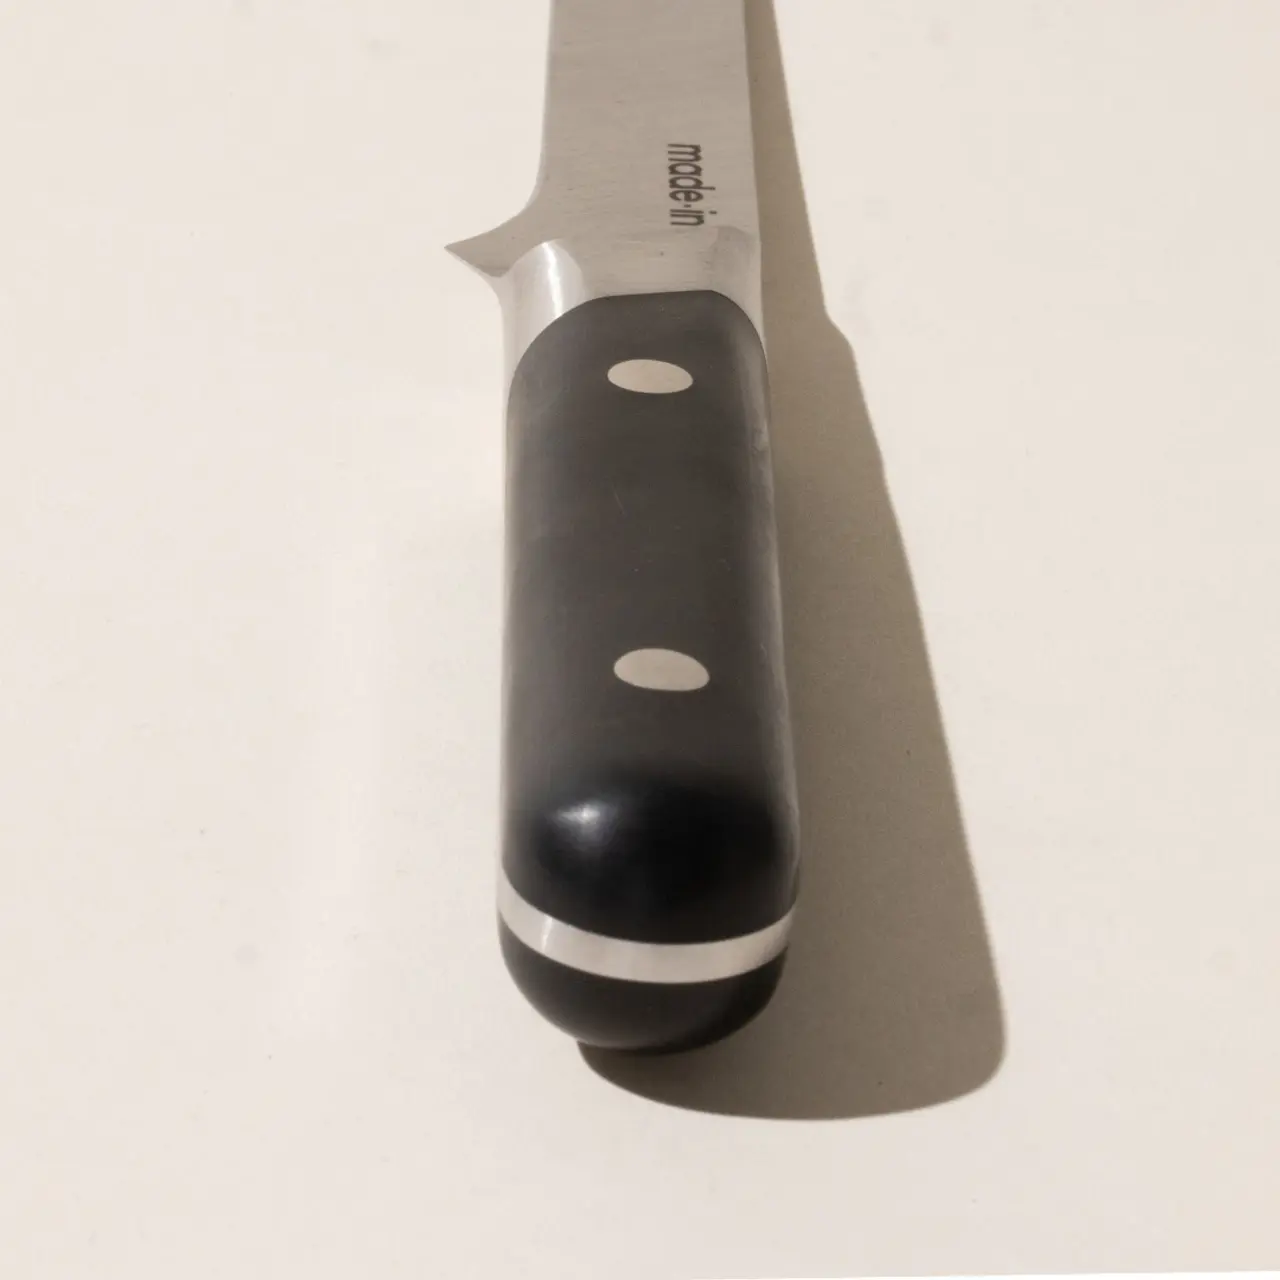 A close-up of a kitchen knife with a black handle lying on a surface.